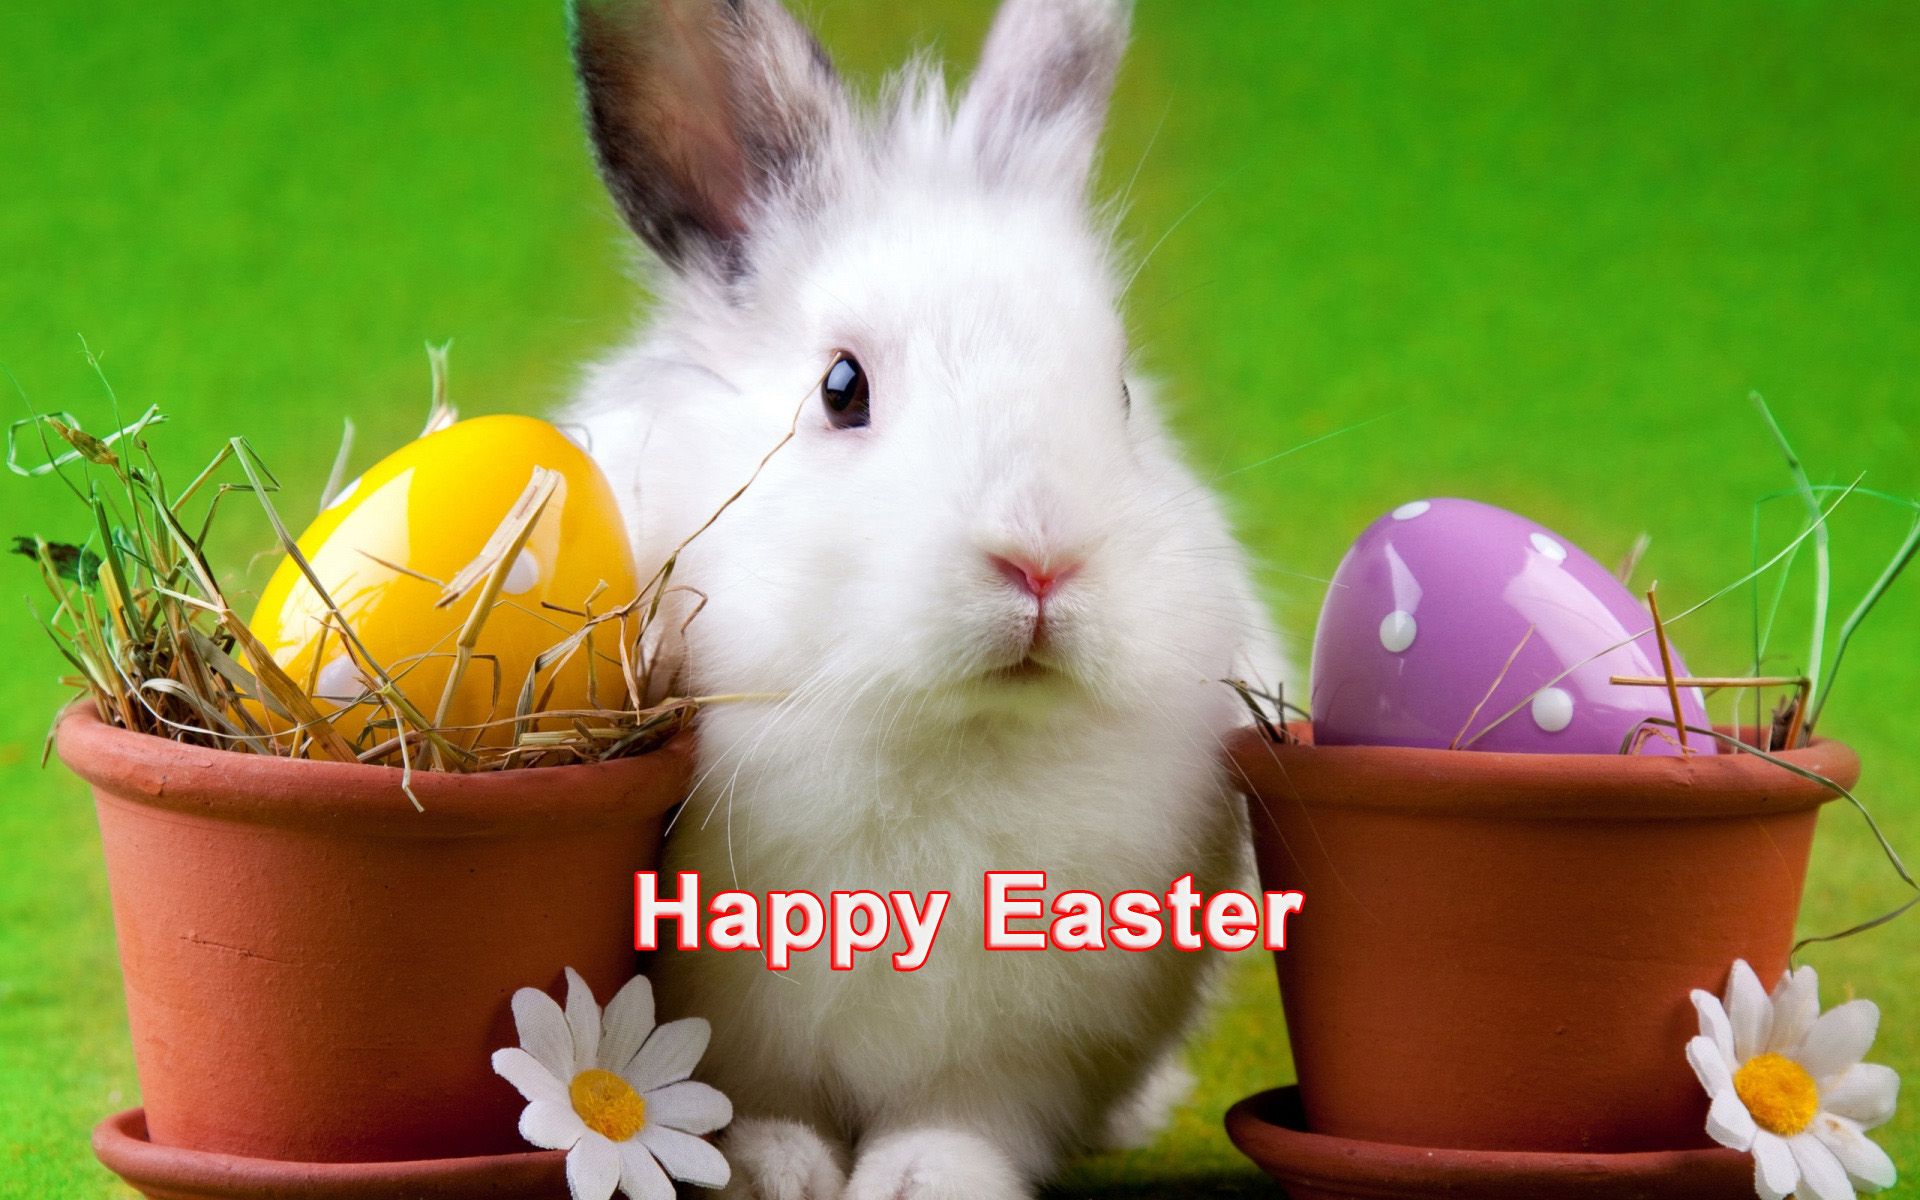 Happy Easter Bunny HD Wallpaperto5animations.com Wallpaper, Gifs, Background, Image